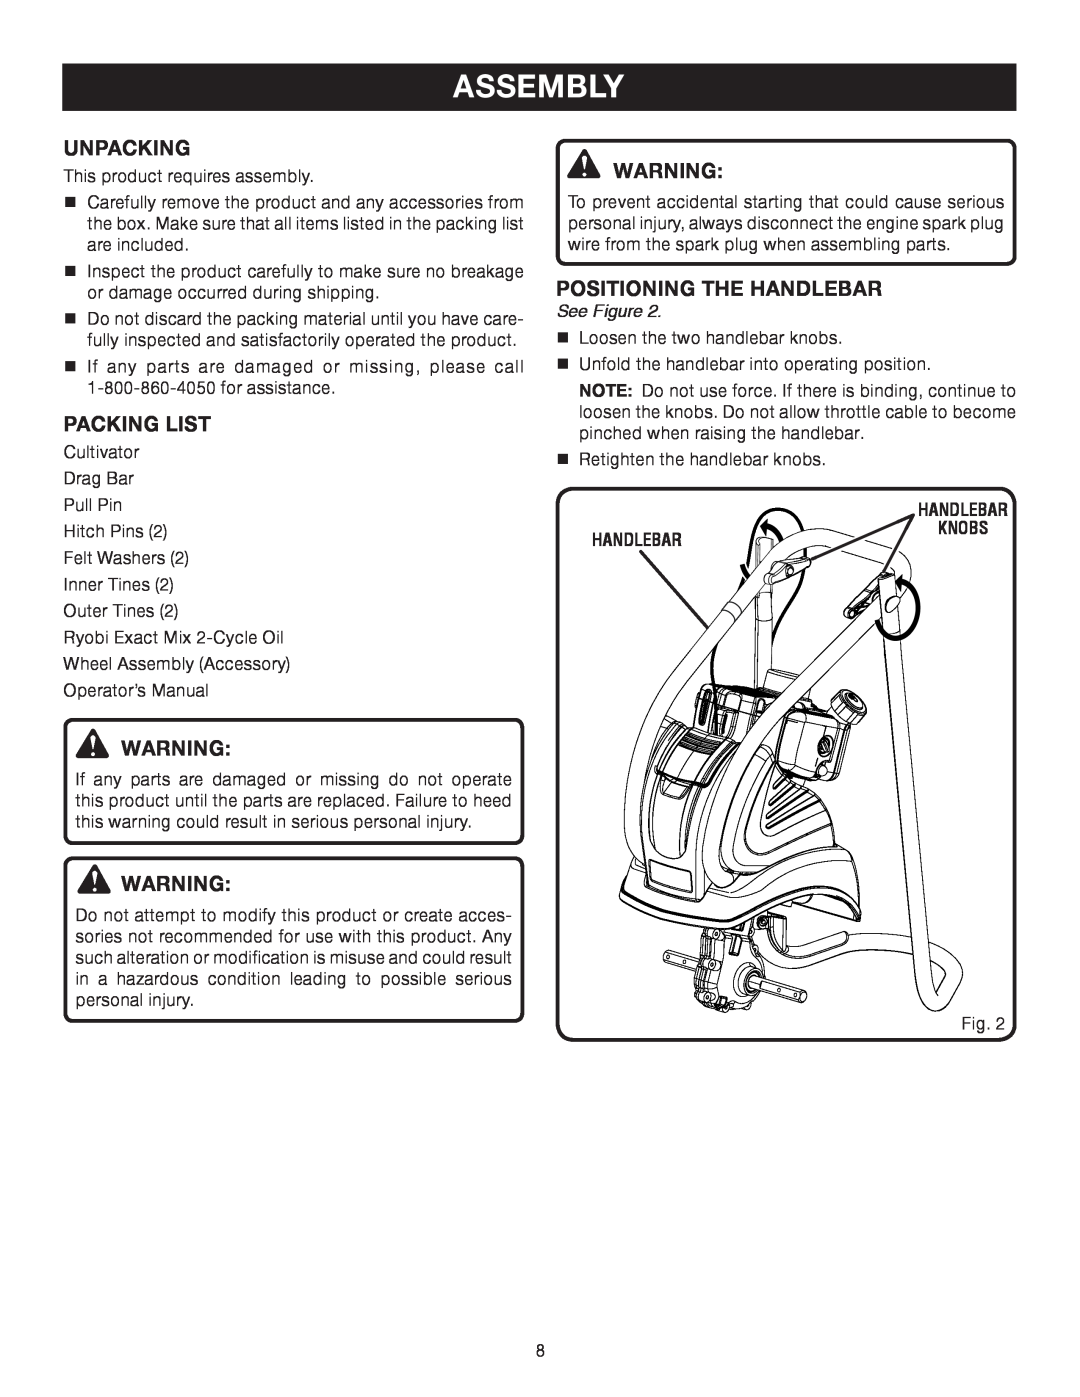 Ryobi RY60512 manual Assembly, Unpacking, Packing List, Positioning The Handlebar, See Figure 